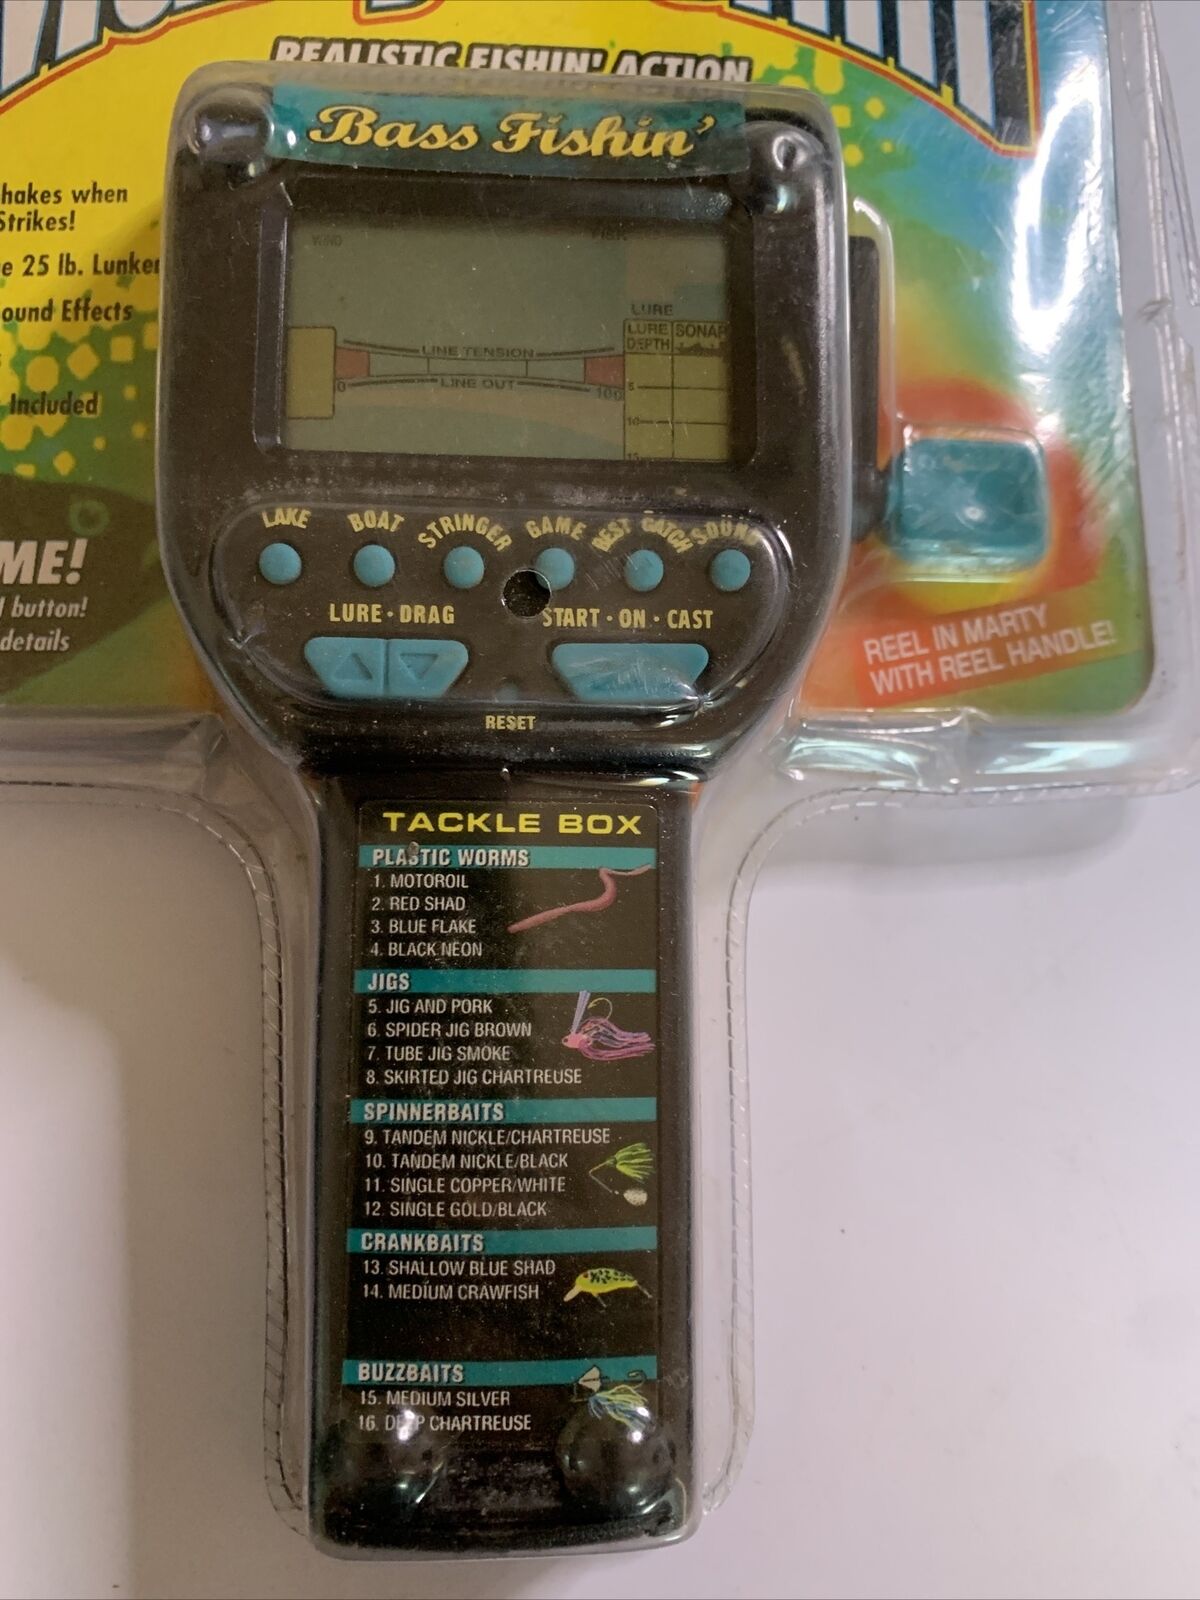 Marty Bass Fishing Portable LCD Electronic Game NEW – Retro Unit